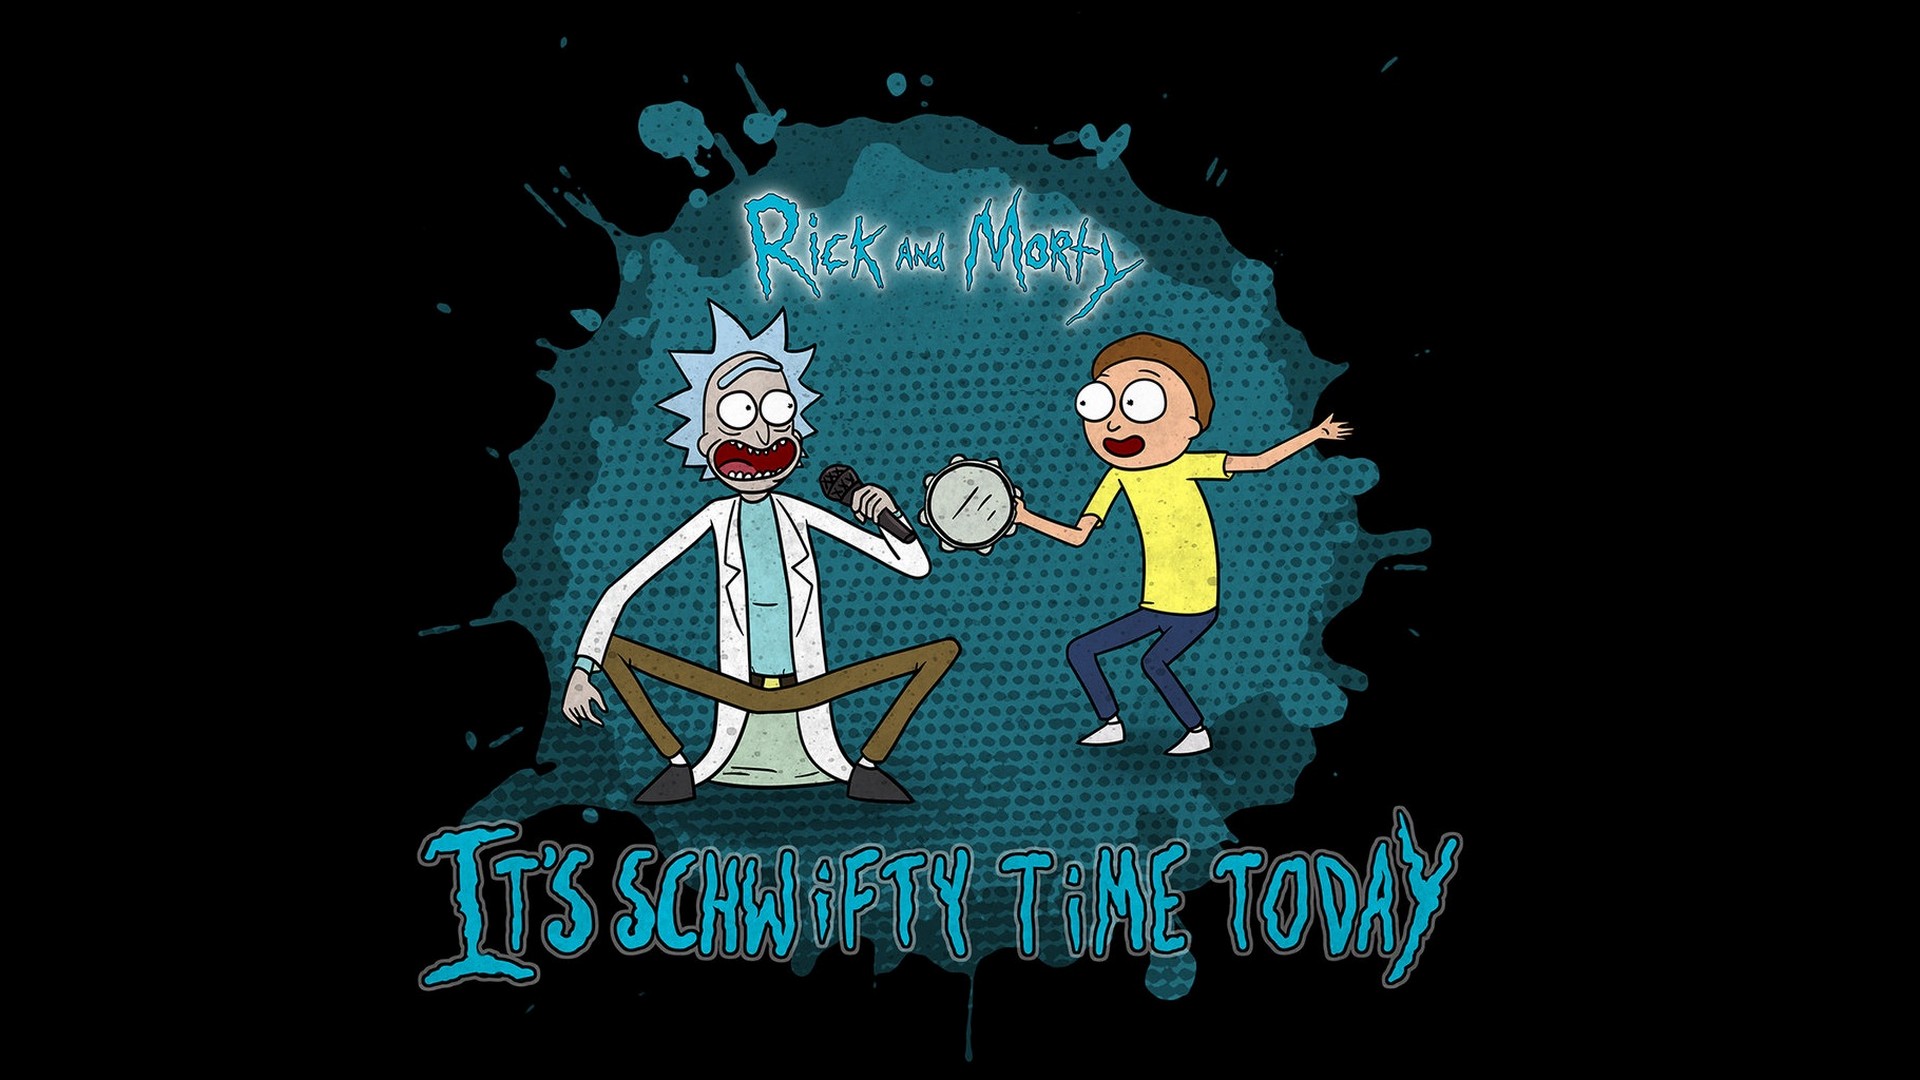 HD Rick and Morty Art Backgrounds with image resolution 1920x1080 pixel. You can use this wallpaper as background for your desktop Computer Screensavers, Android or iPhone smartphones